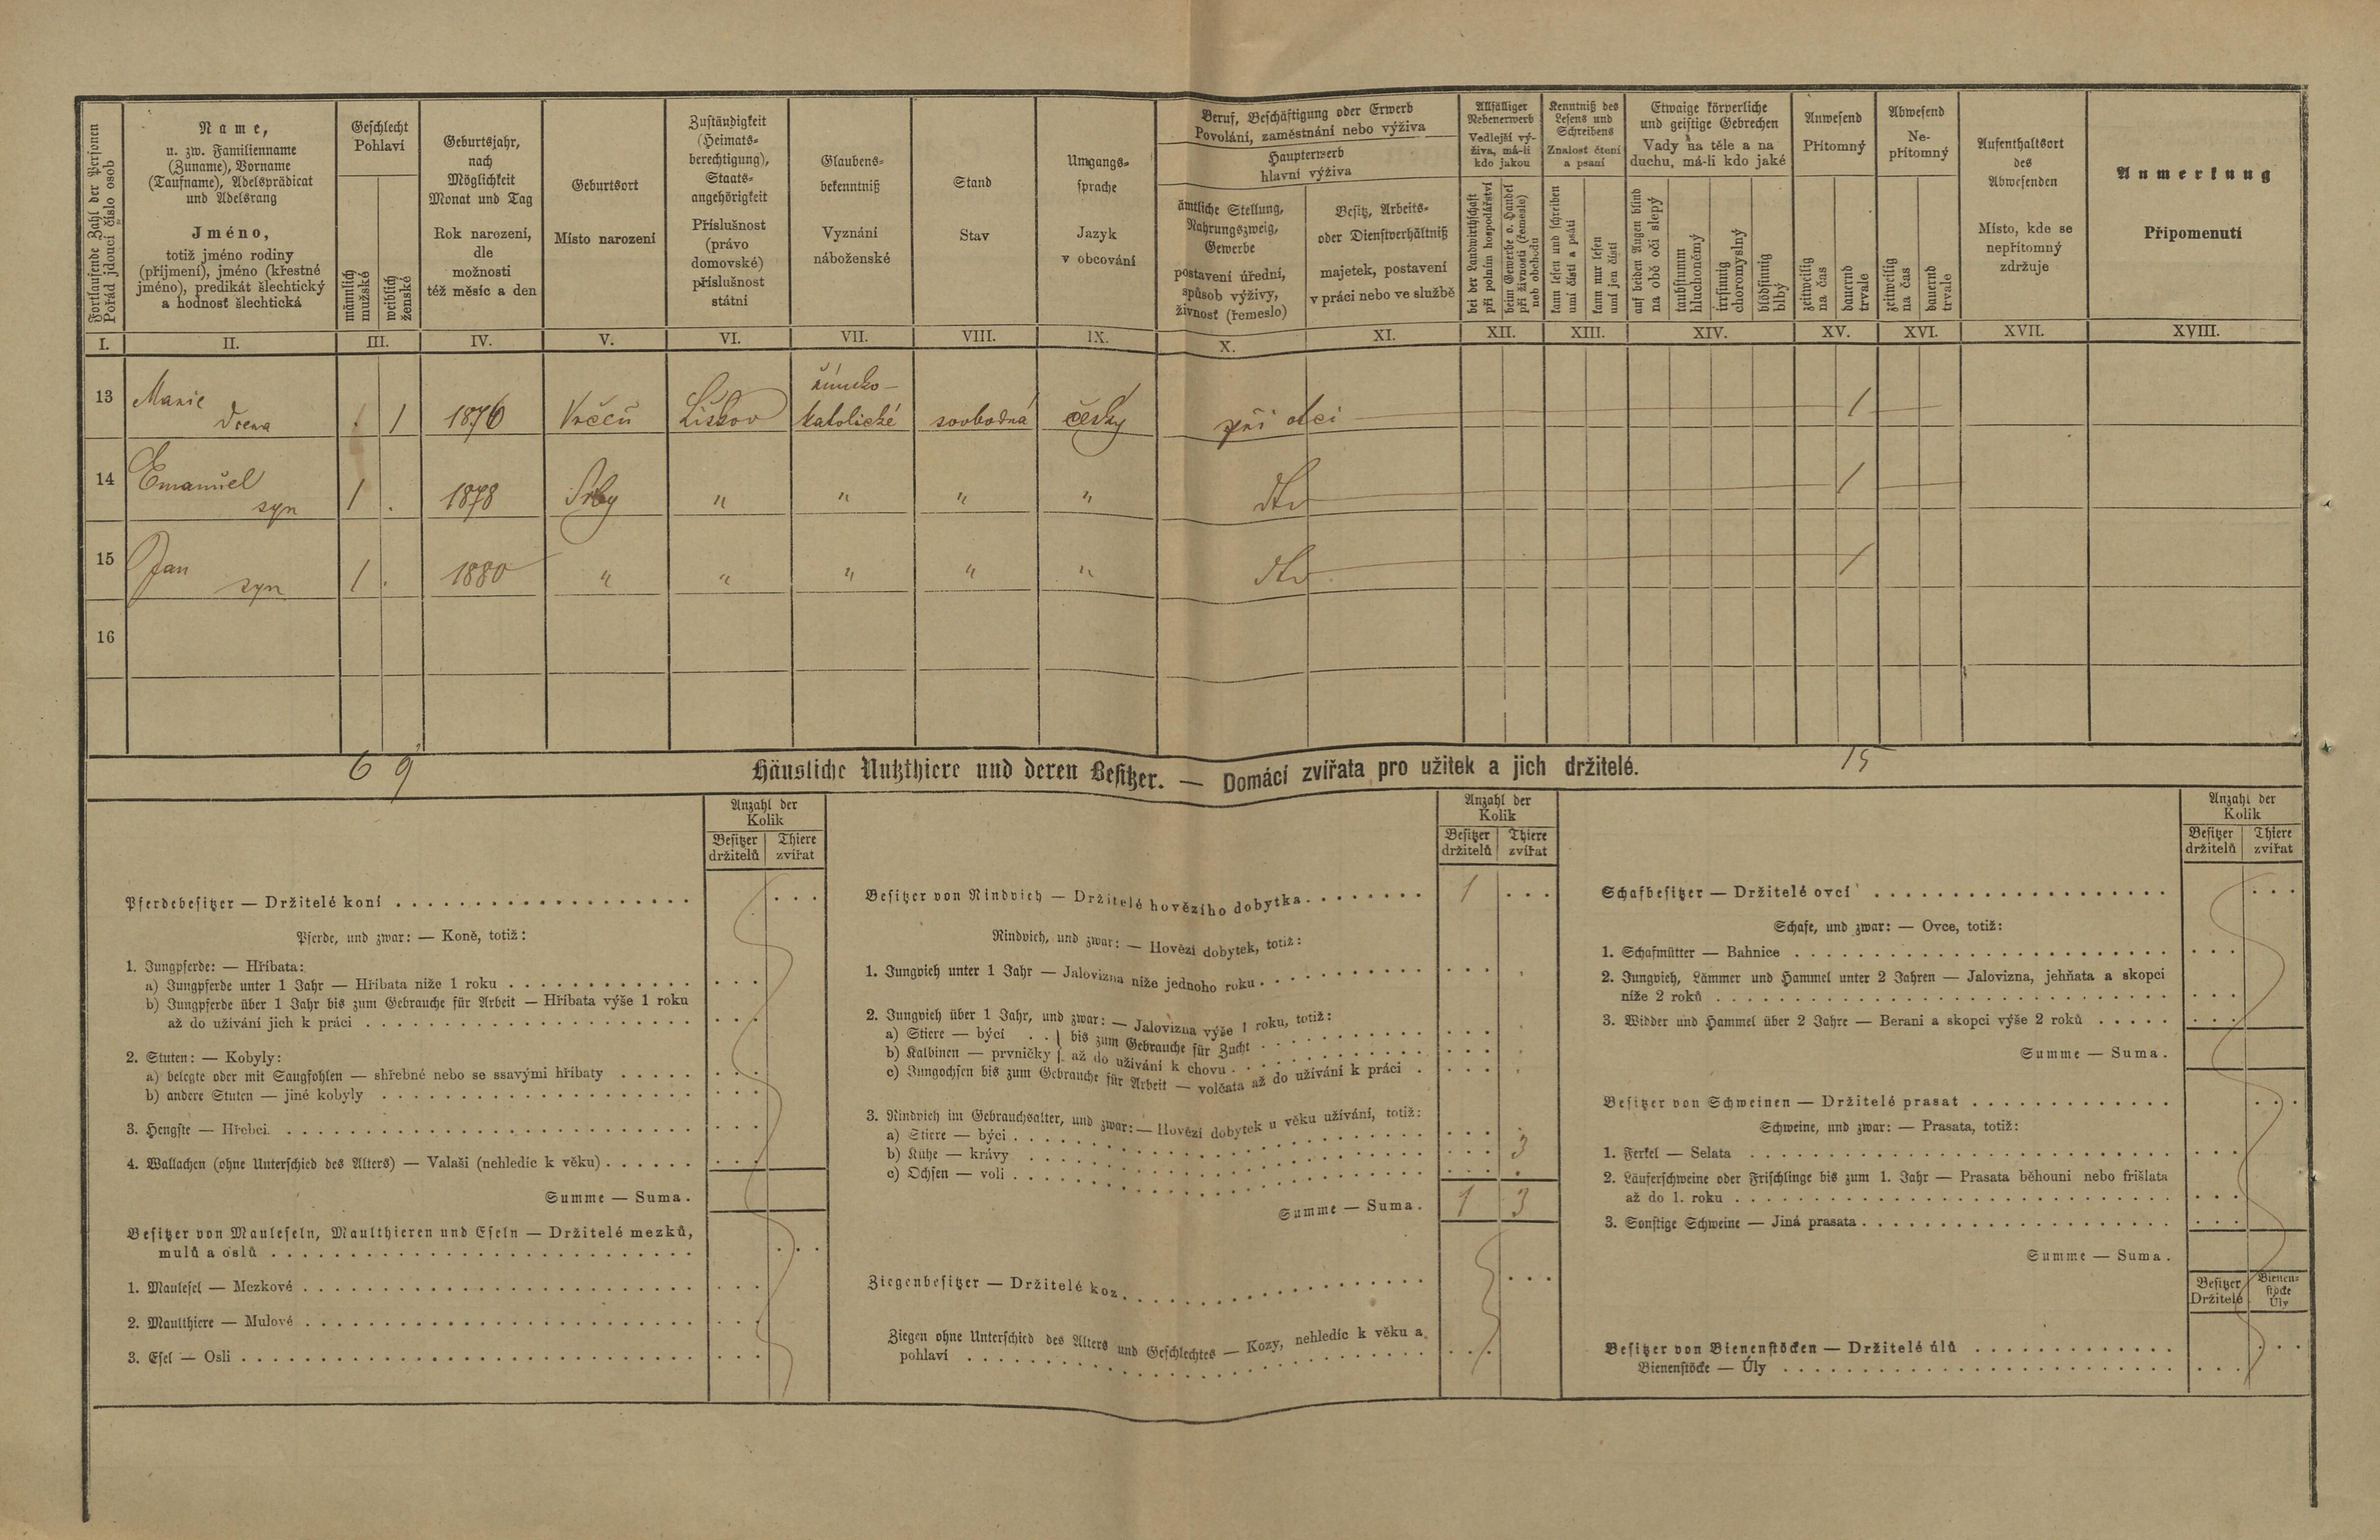 2. soap-pj_00302_census-1880-srby-cp034_0020